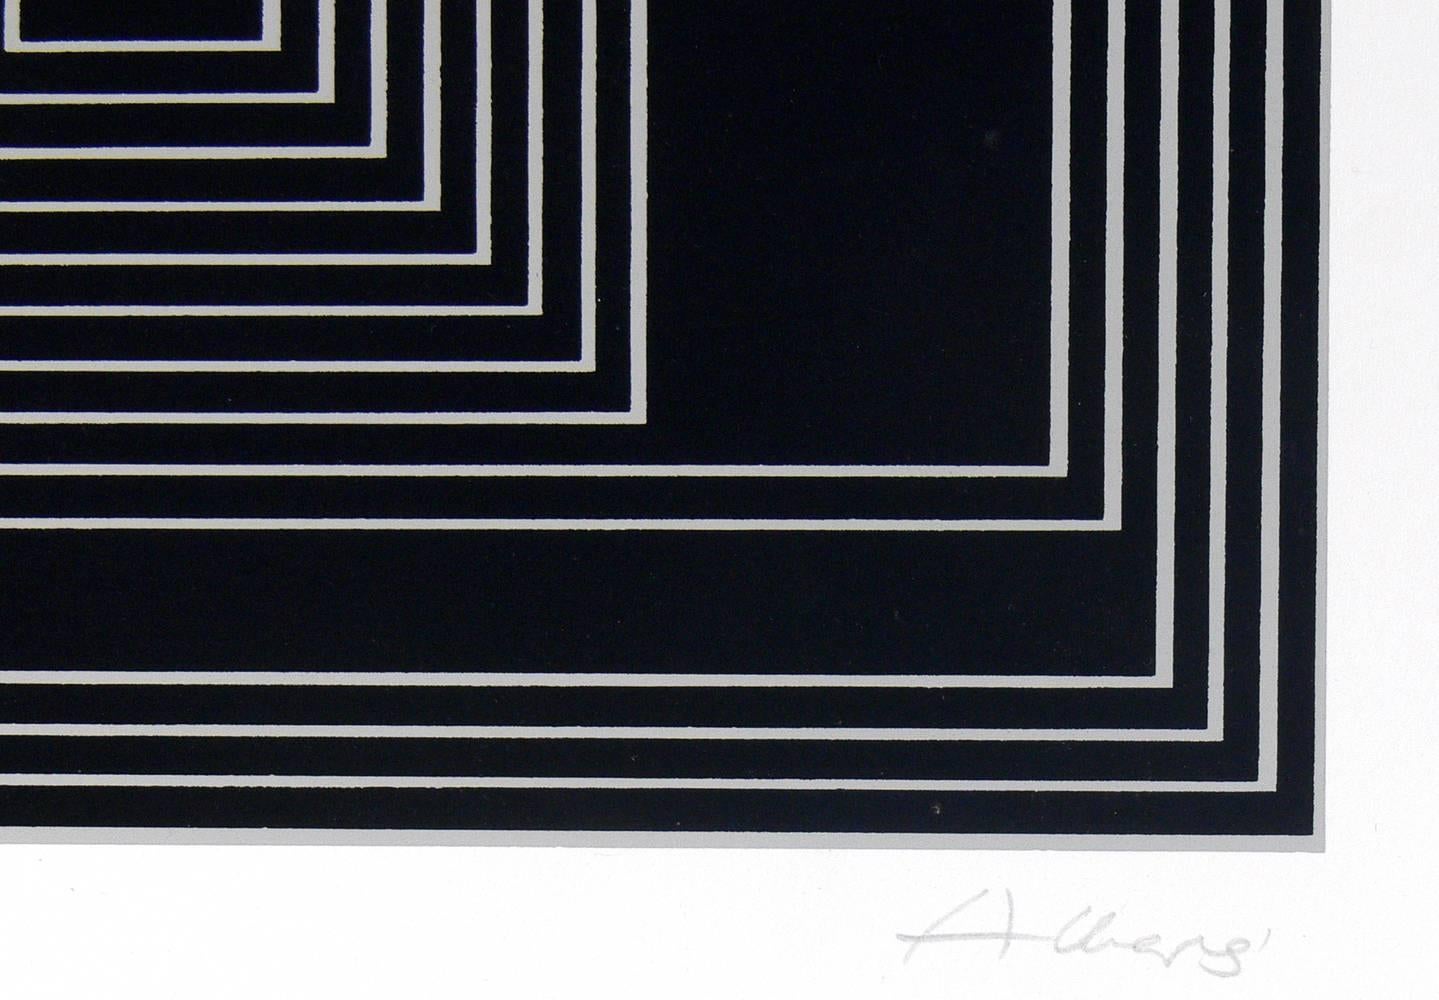 Lacquered Pair of Geometric Lithographs by Josef Albers